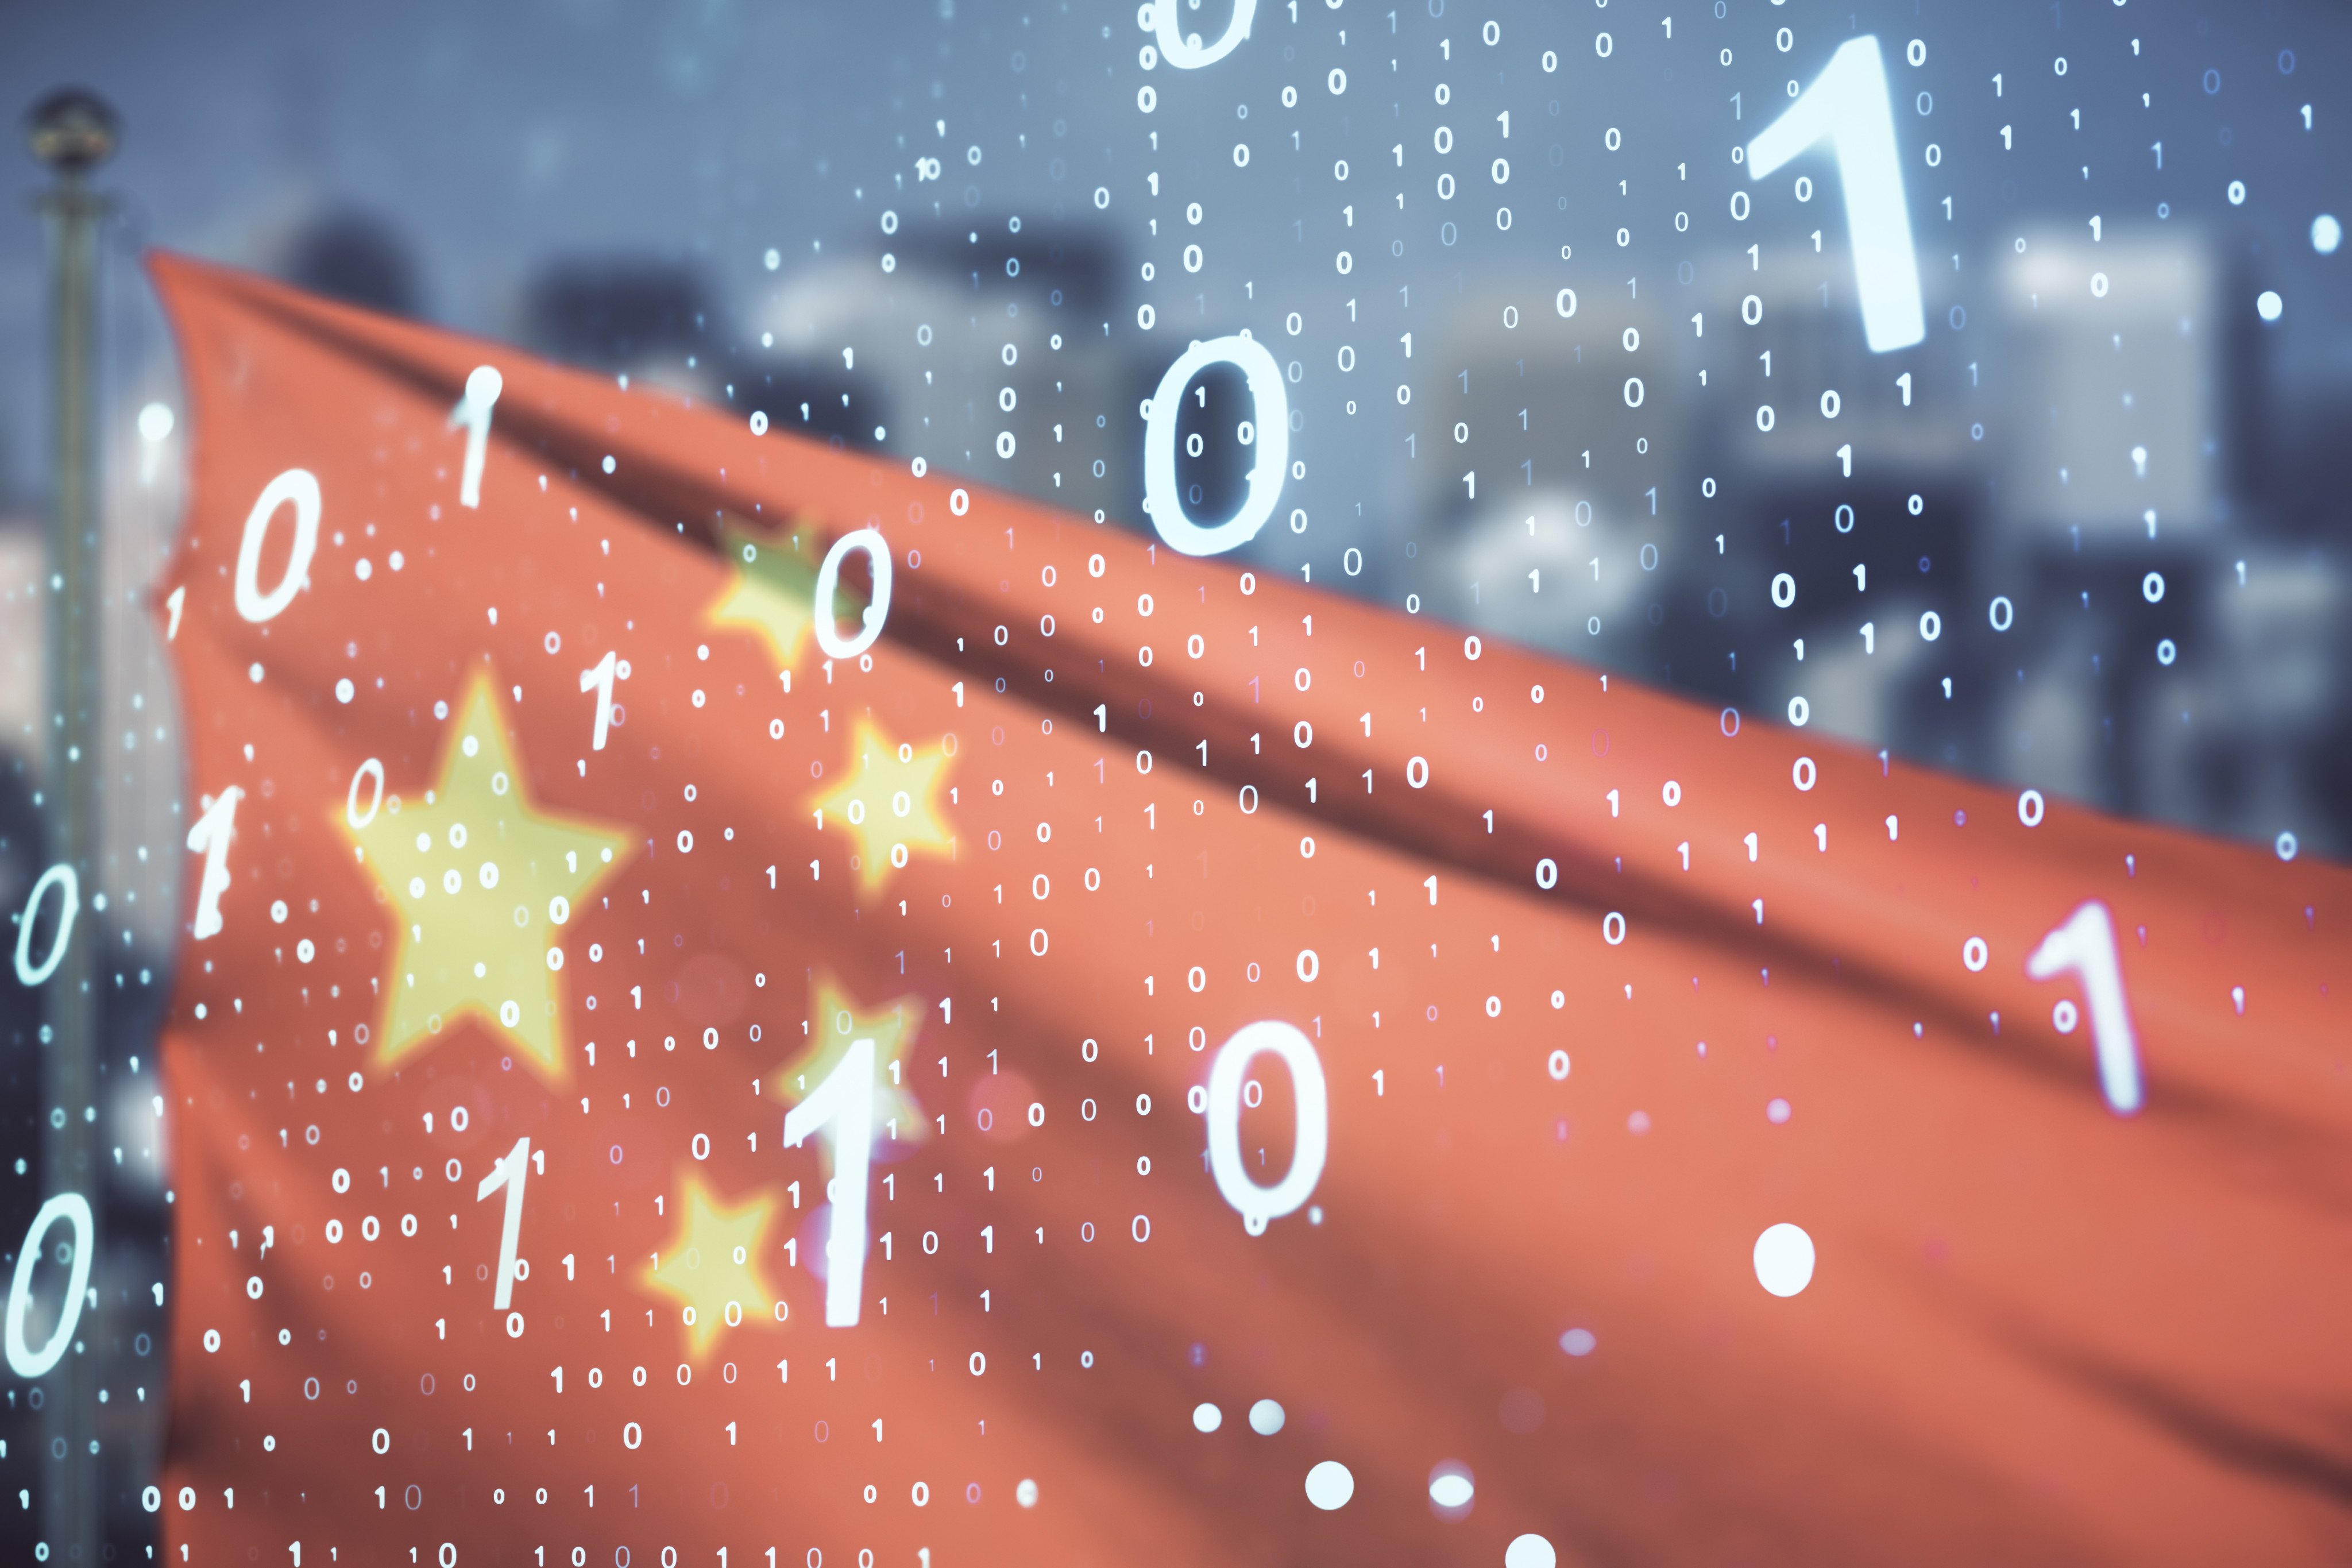 Malaysia has been luring in a number of Chinese firms, including major companies like ByteDance and GDS, to set up data centres. Photo: Shutterstock